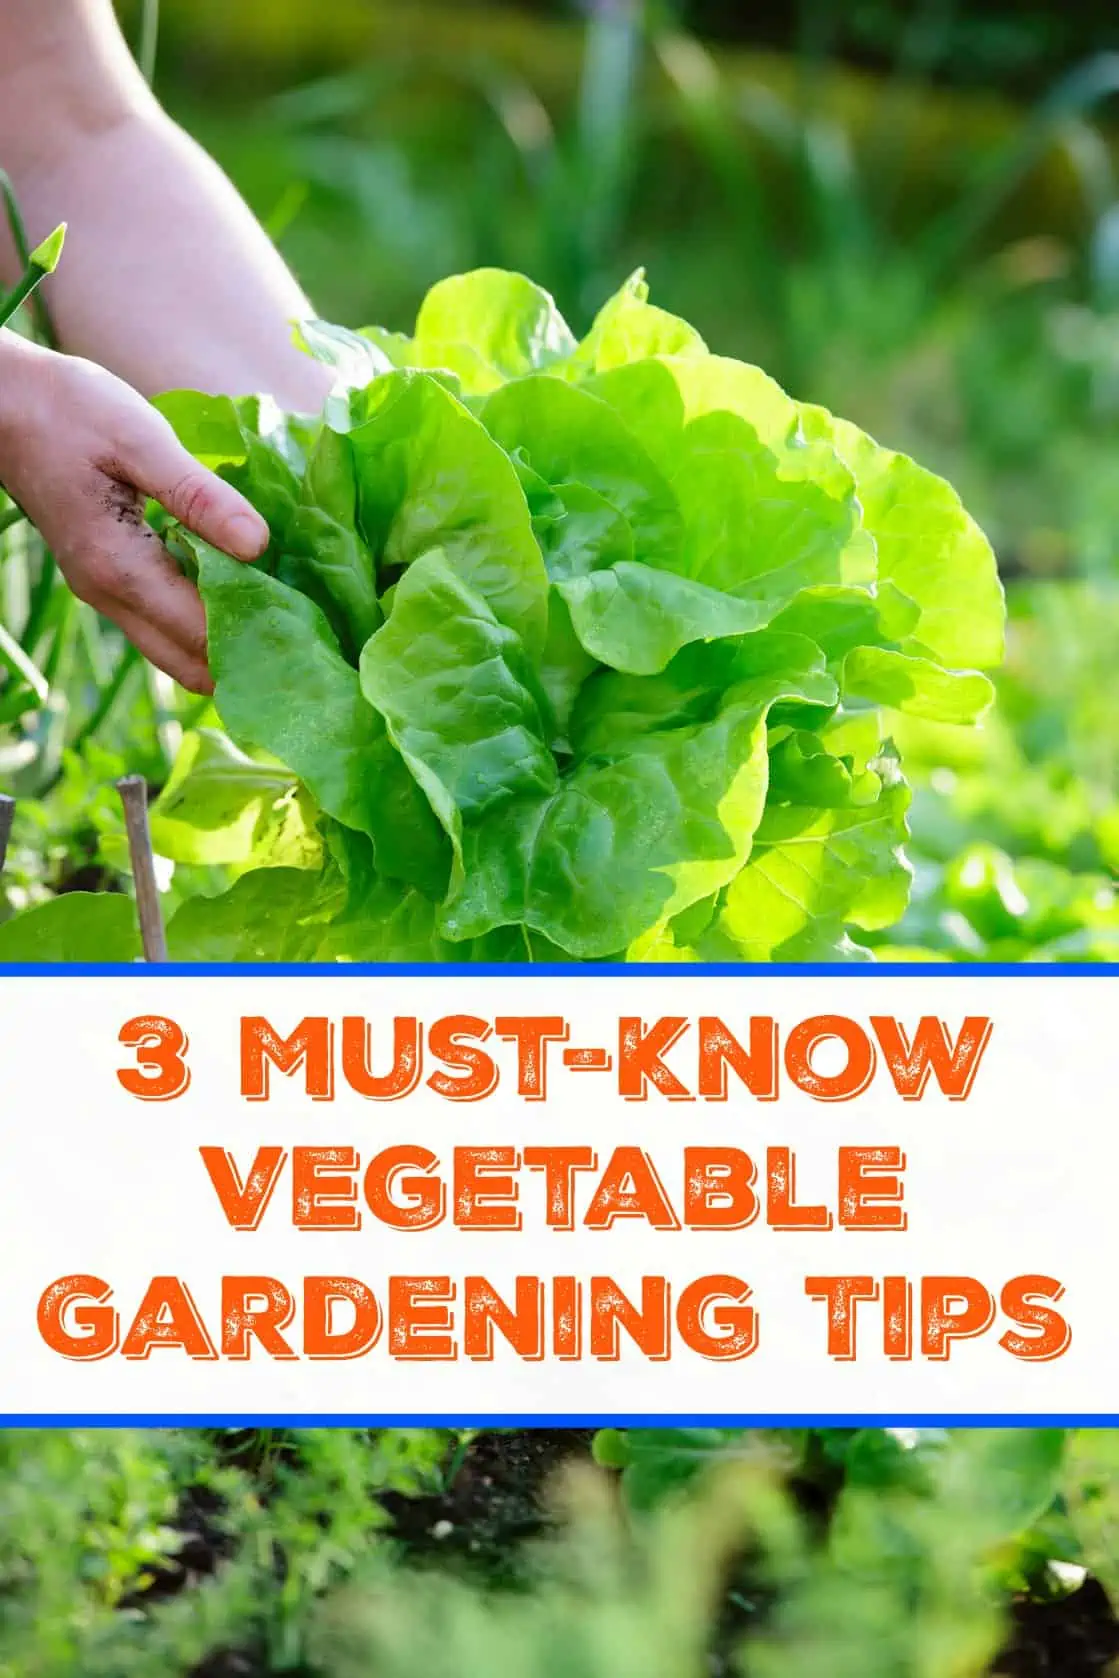 Must-Know Vegetable Gardening Tips